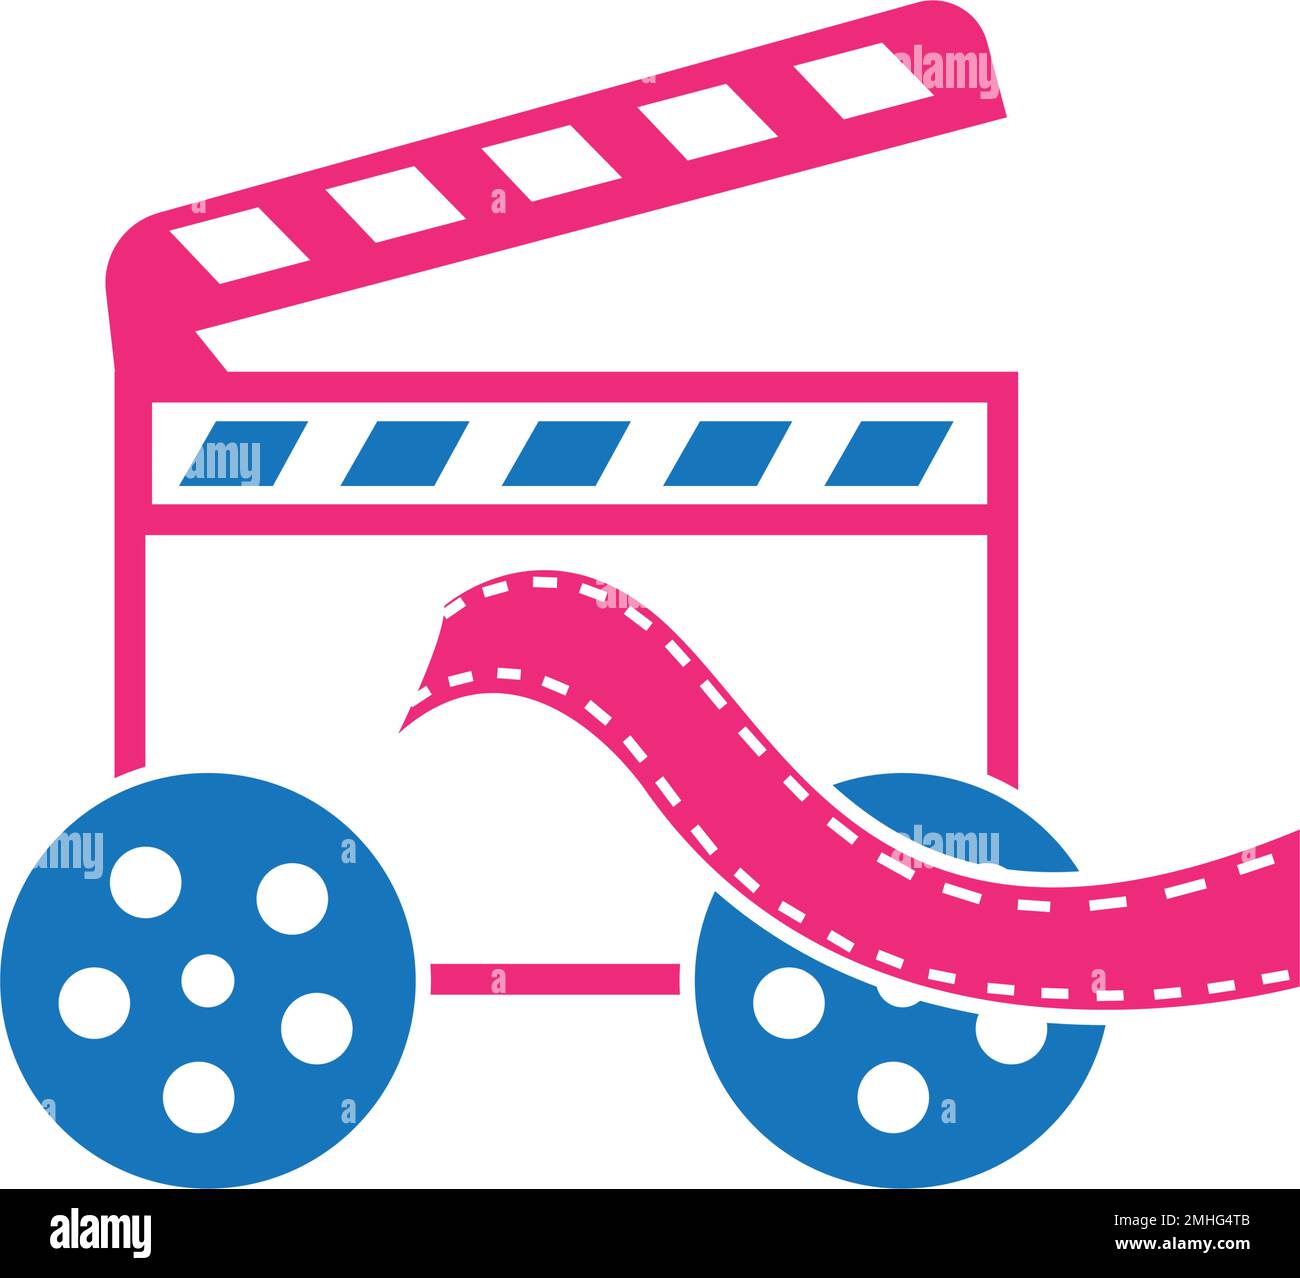 production house or film industry logo. vector illustration design template. Stock Vector